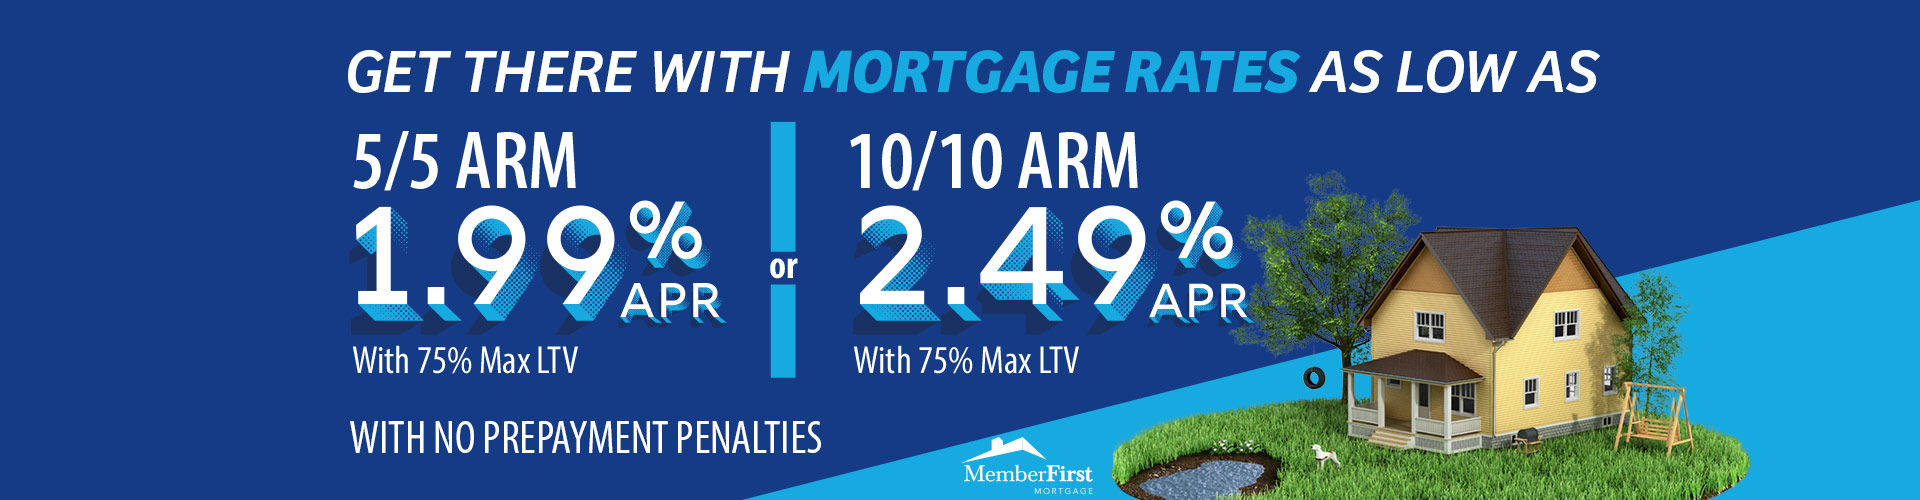 Get there with mortgage rates as low as a 5/5 ARM at 1.99% APR with 75% Max LTV or a 10/10 ARM at 2.49% APR with 75% Max LTV with no prepayment penalties. 